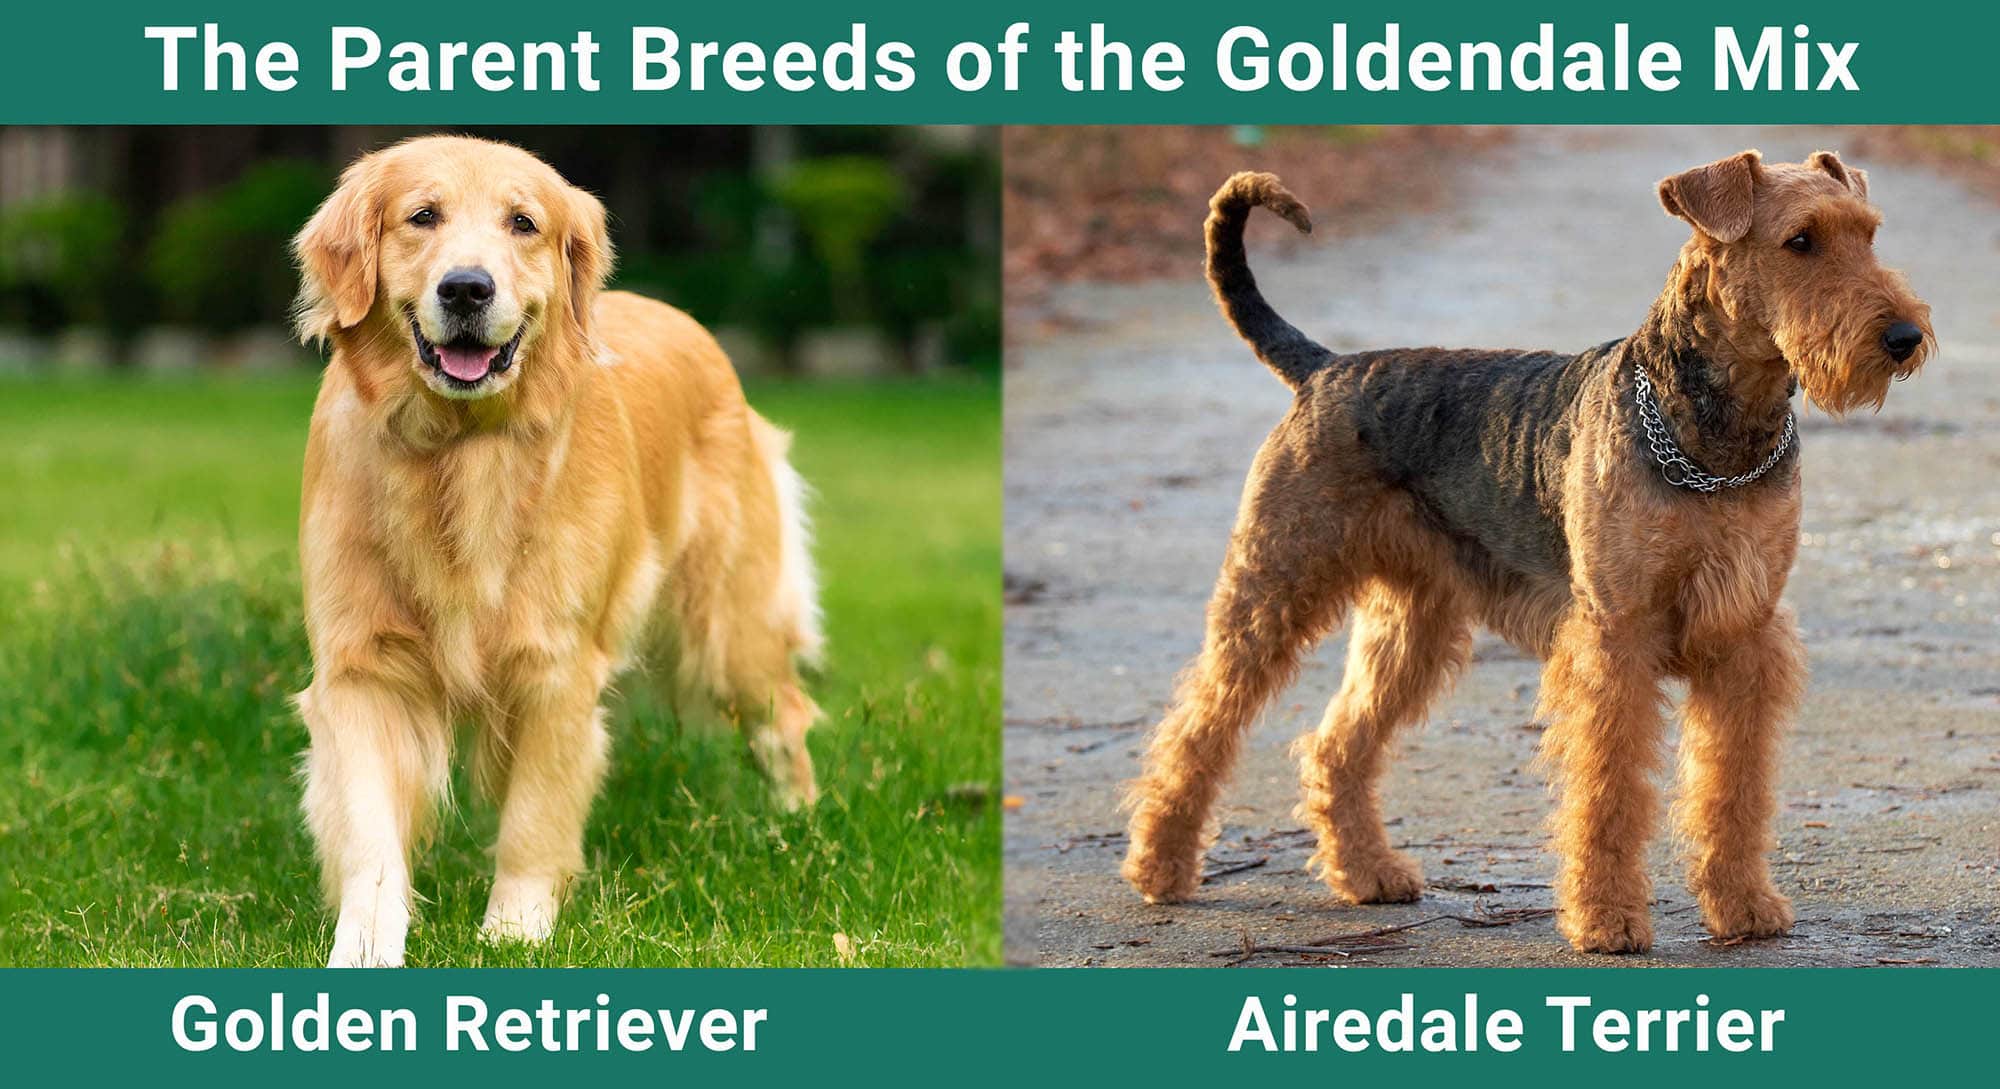 The Parent Breeds of the Goldendale